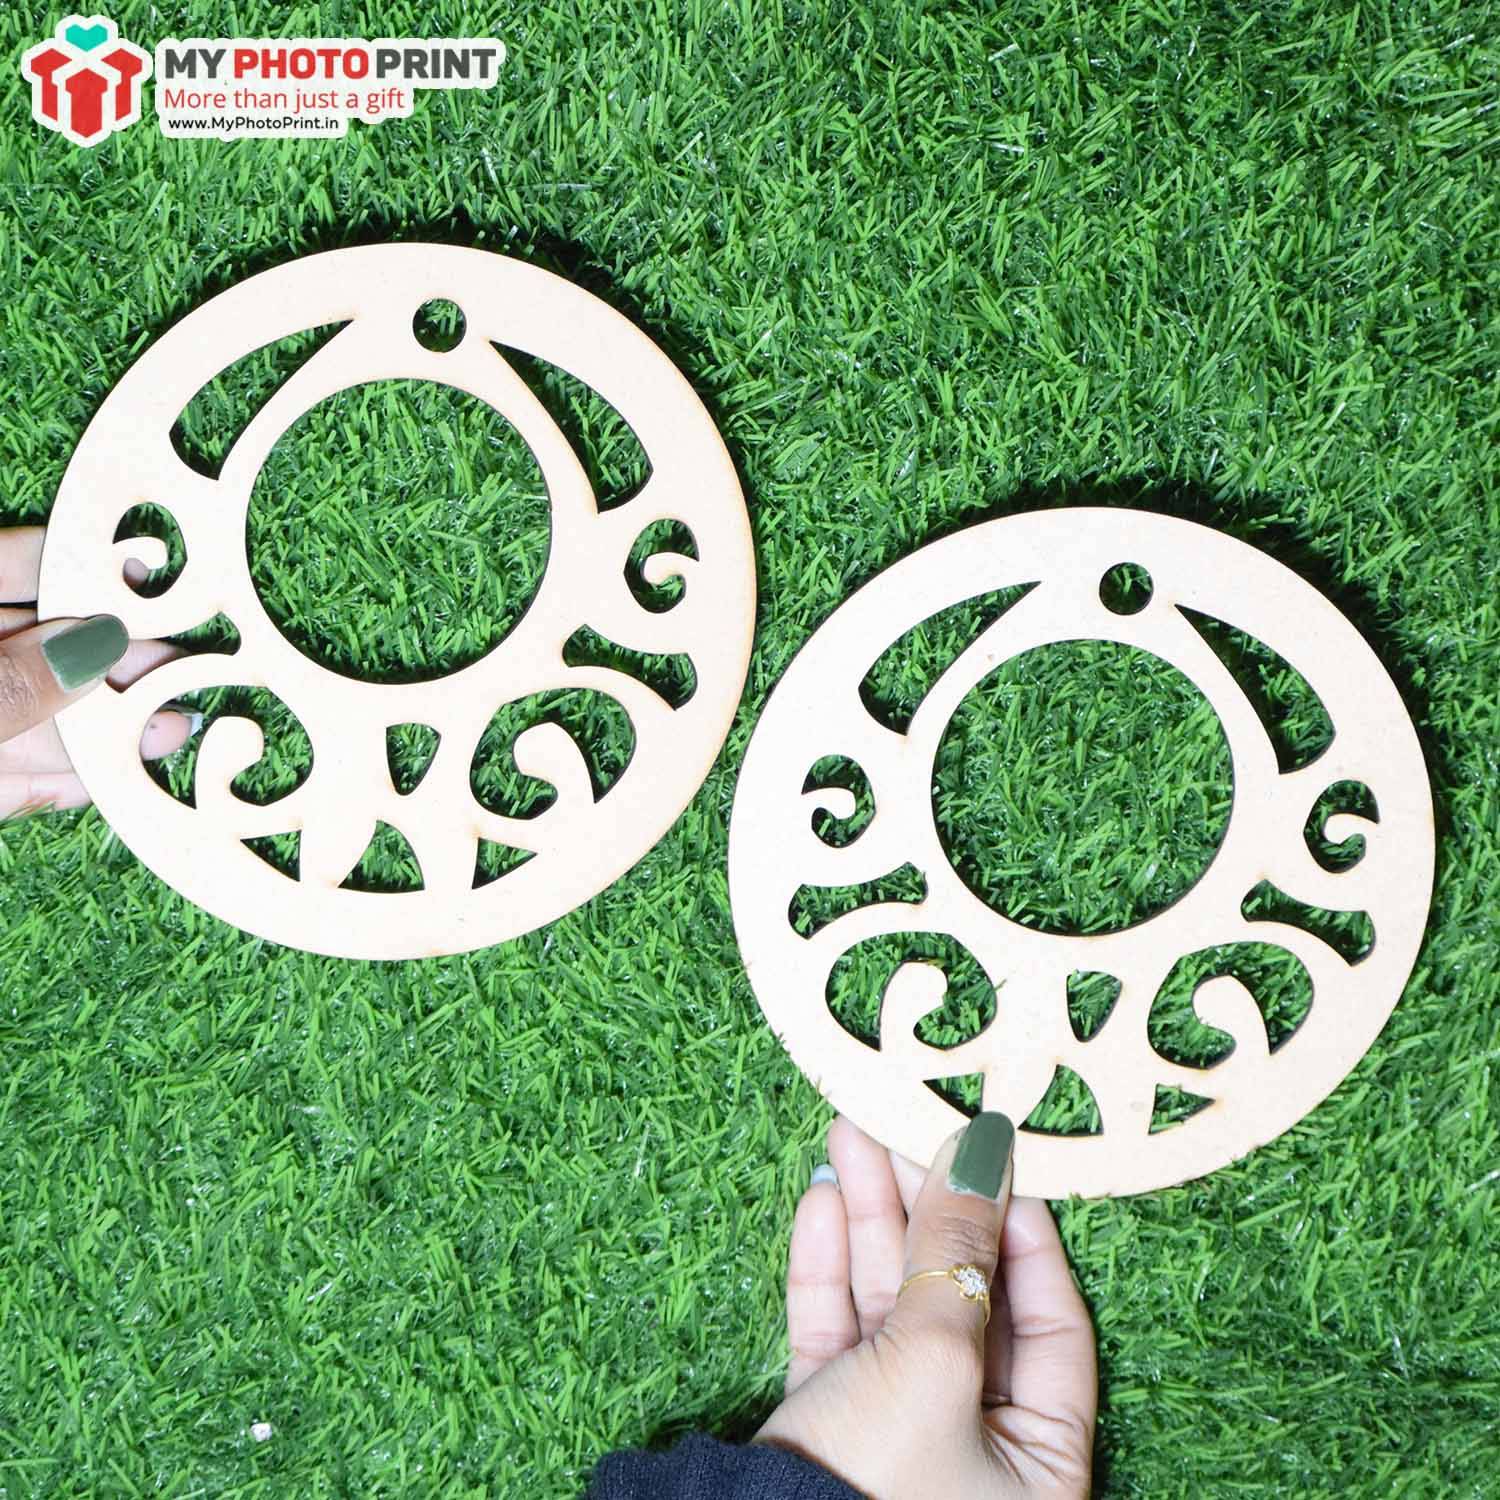 Round Design MDF Wooden Craft Cutout Any Shapes & Patterns | (Pack Of 15pcs)